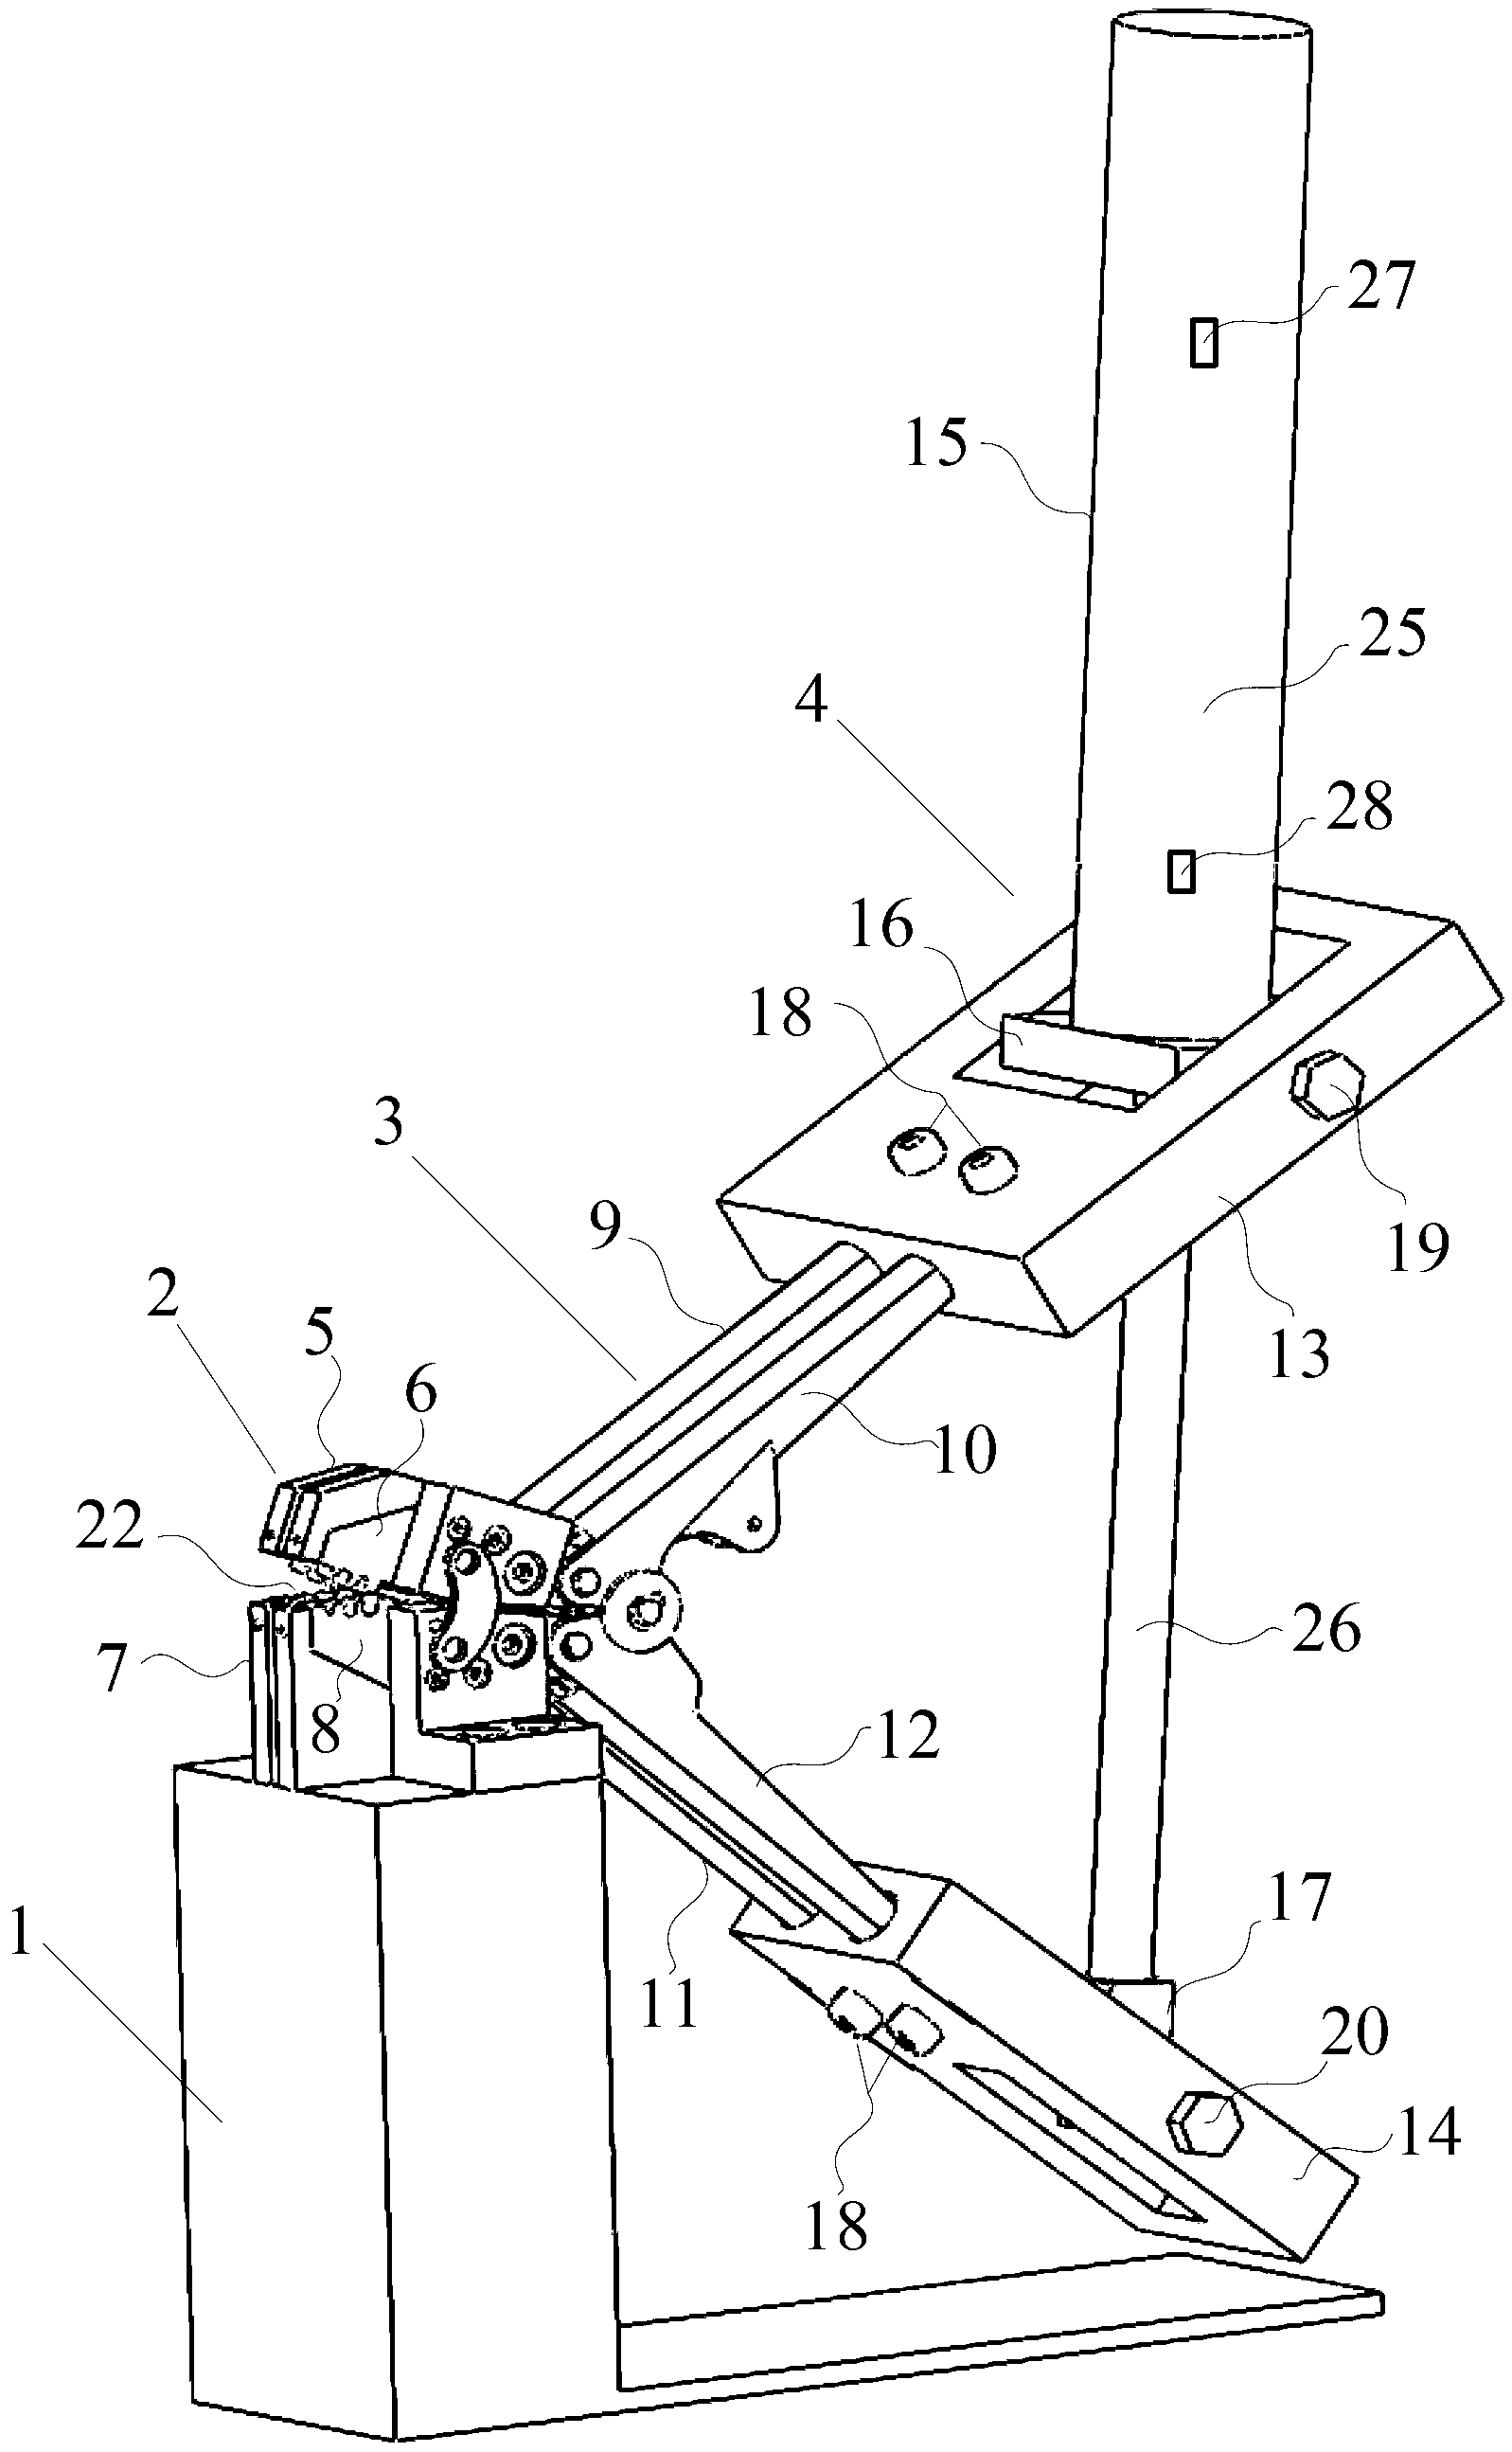 Pneumatically-driven double-end automatic crimping device